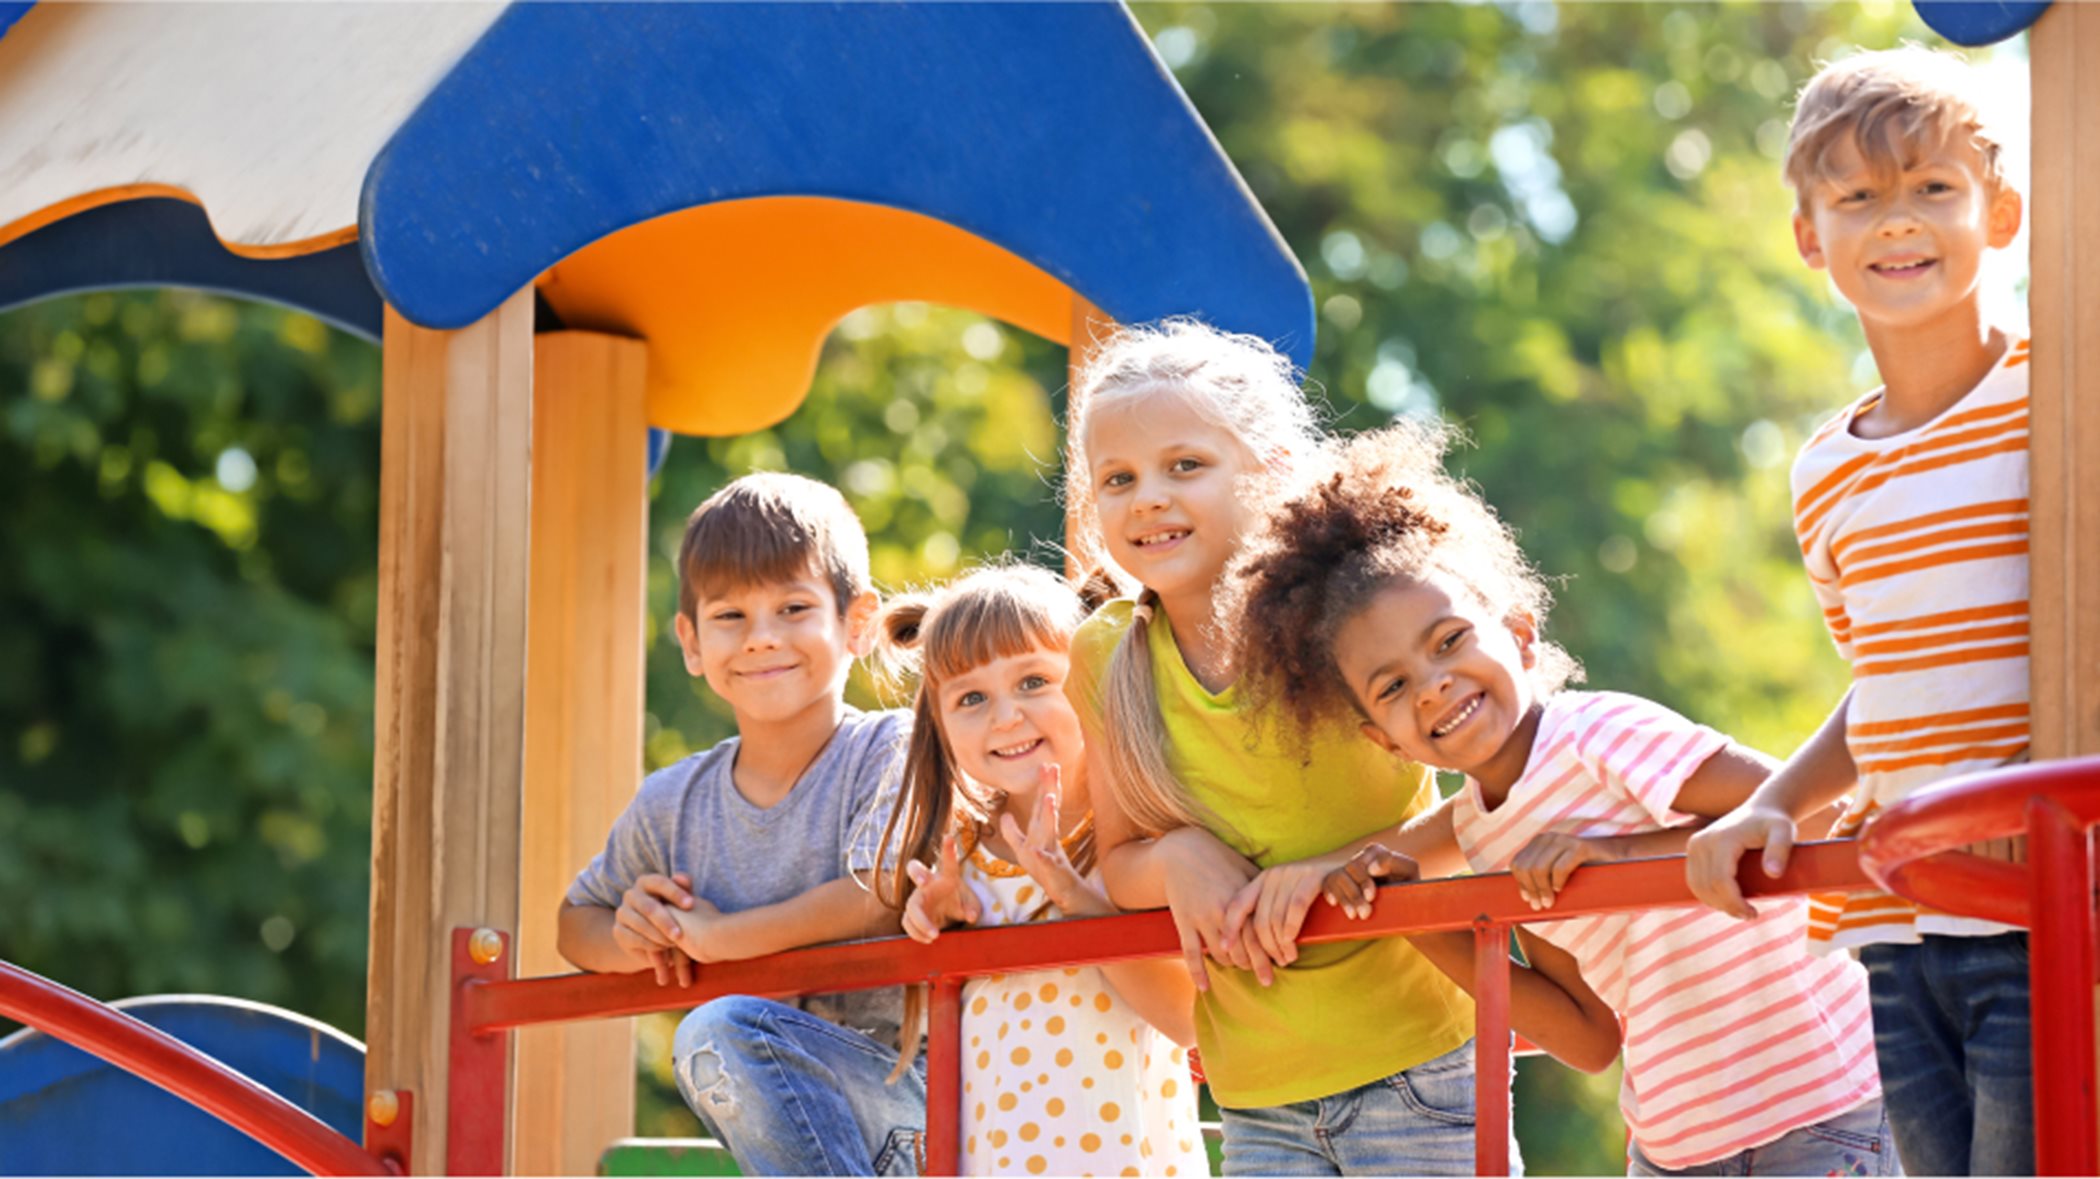 Children on a play structure smiling at the camera